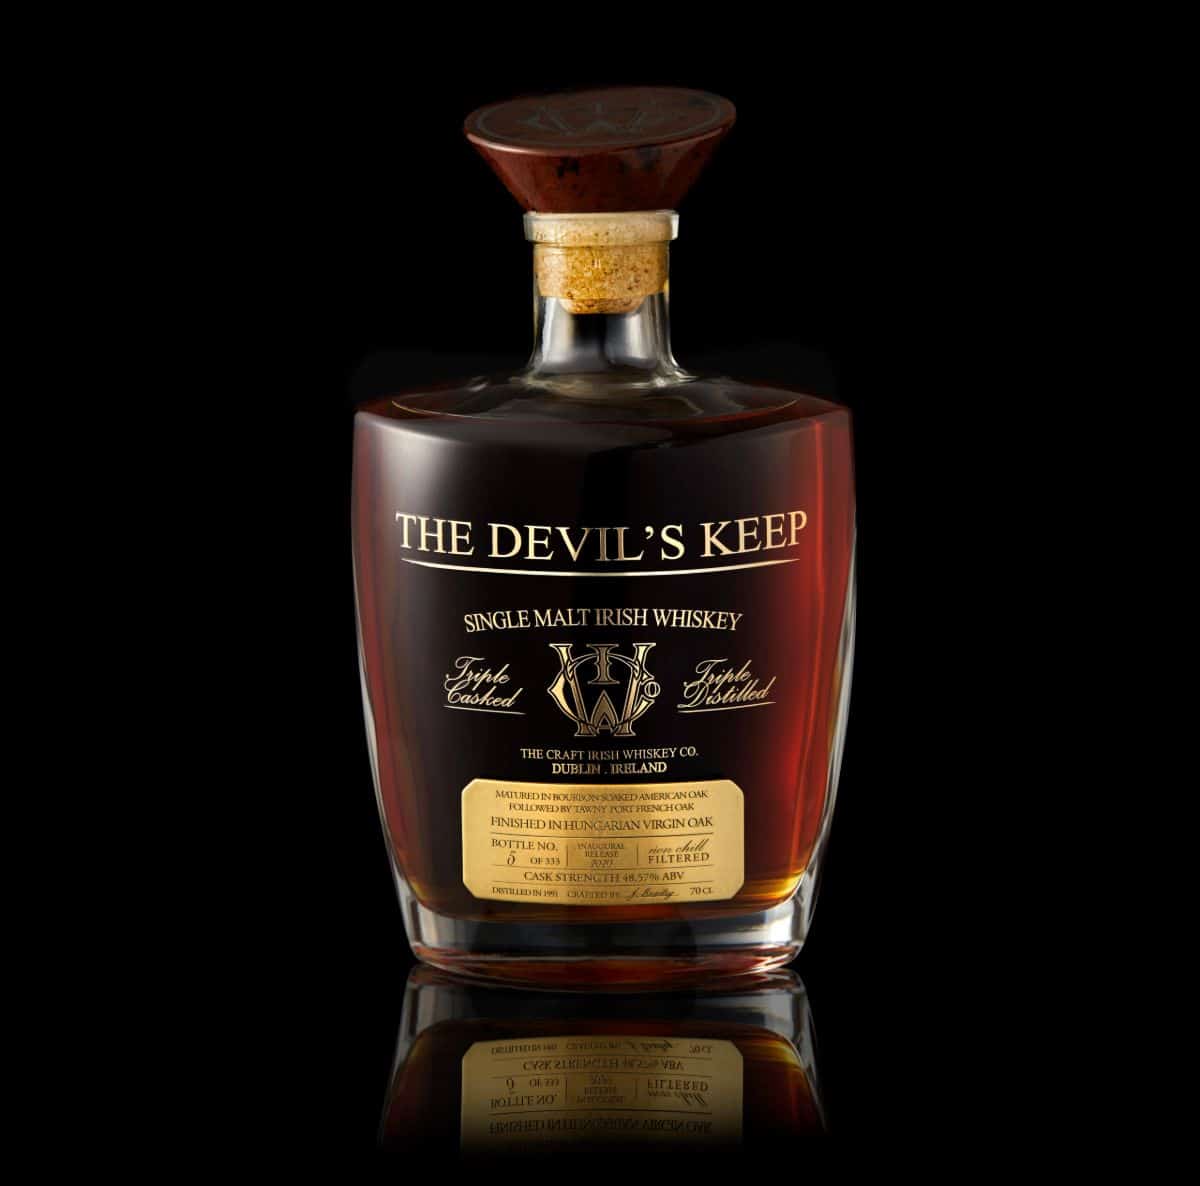 A bottle of premium whiskey The Devil's Keep